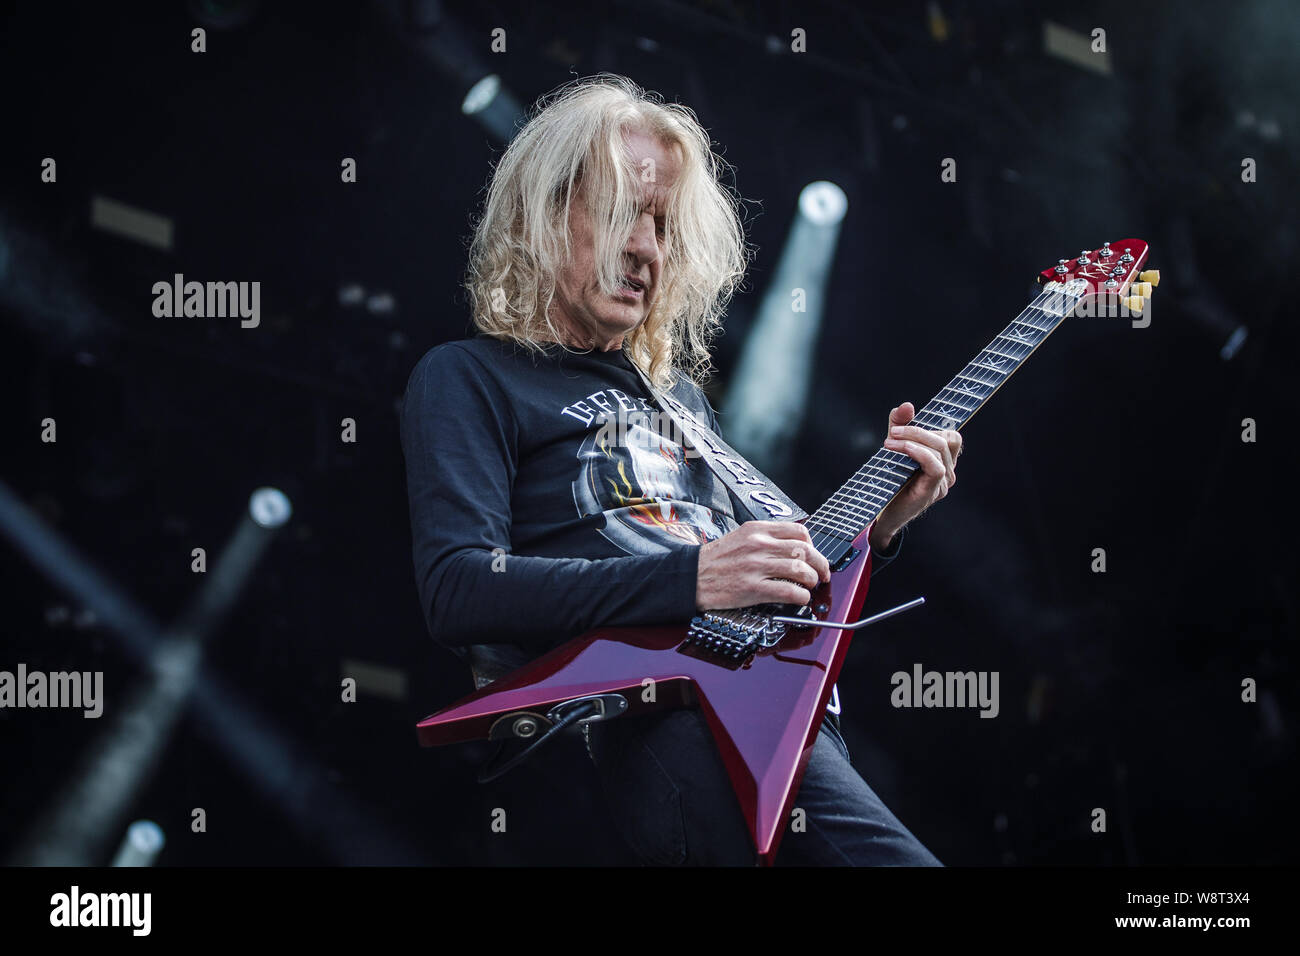 Judas Priest legend, KK Downing joins Ross The Boss as they perform live on stage at Bloodstock Open Air Festival, UK, 11th Aug, 2019. Stock Photo